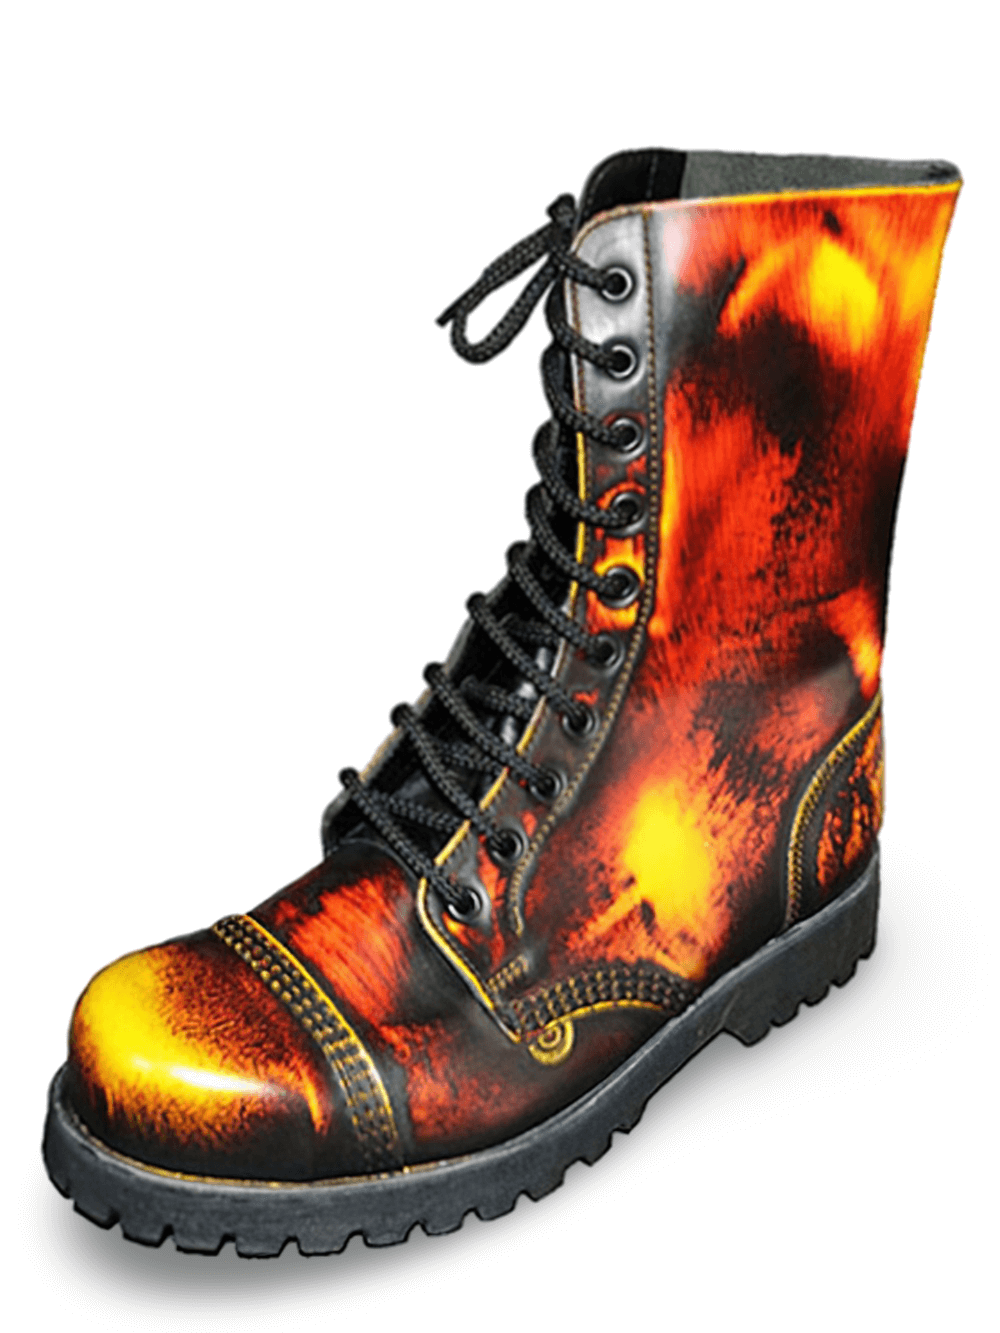 Chic Fiery Leather 10-Eyelet Ranger Lace-Up Boots